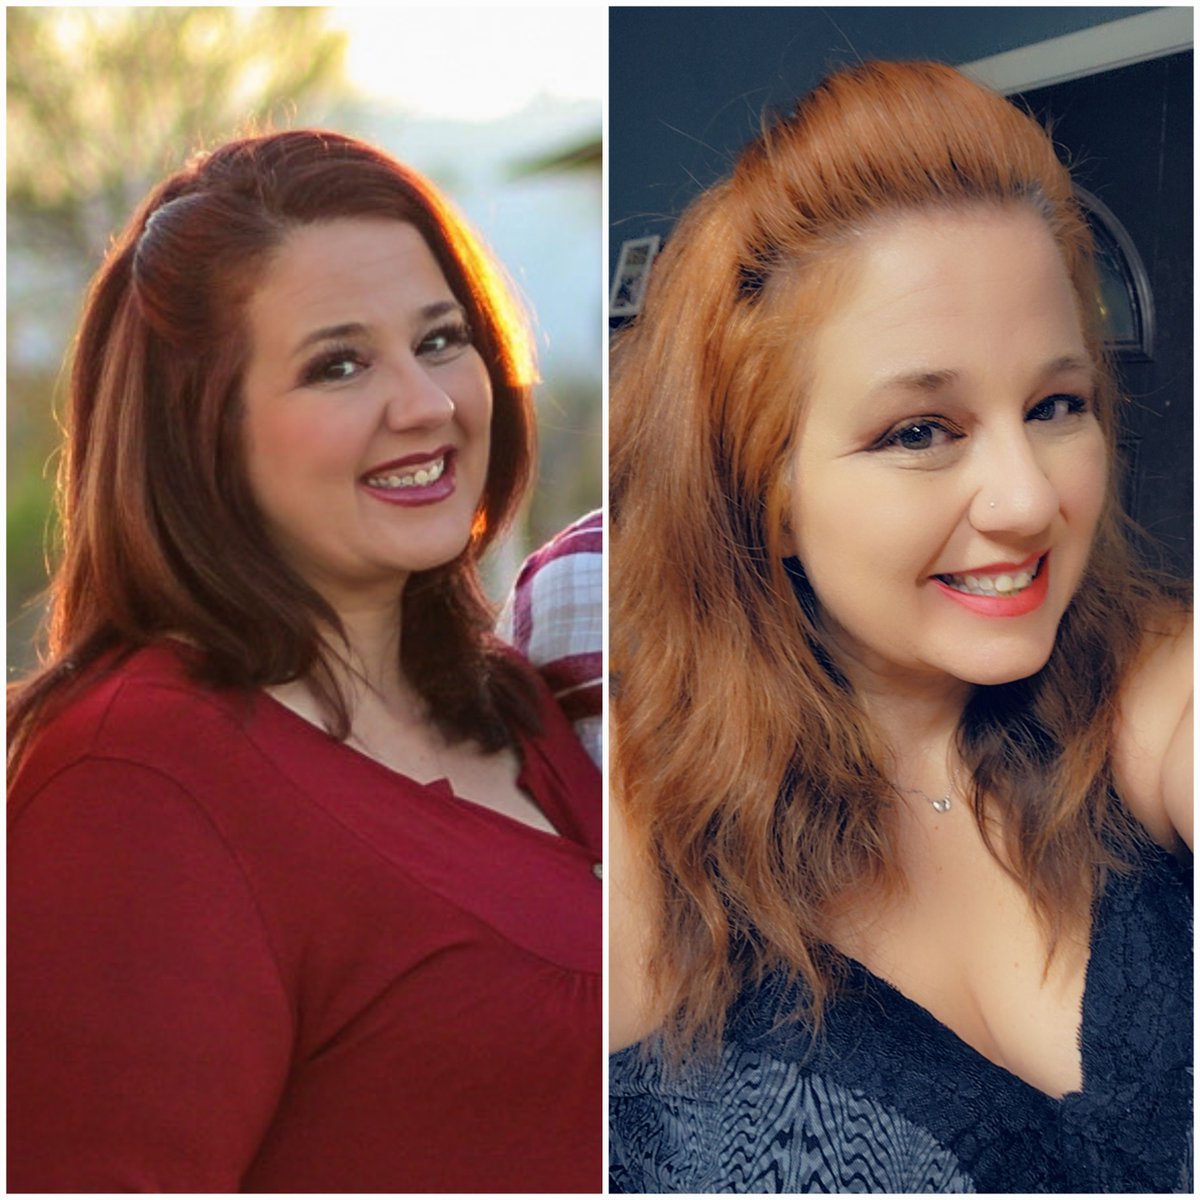 Face to face Friday is the only time I can see  the changes that I've made. After the picture on the left, I knew I needed to make a change. #facetofacefriday #workinprogress #weightlossjourney